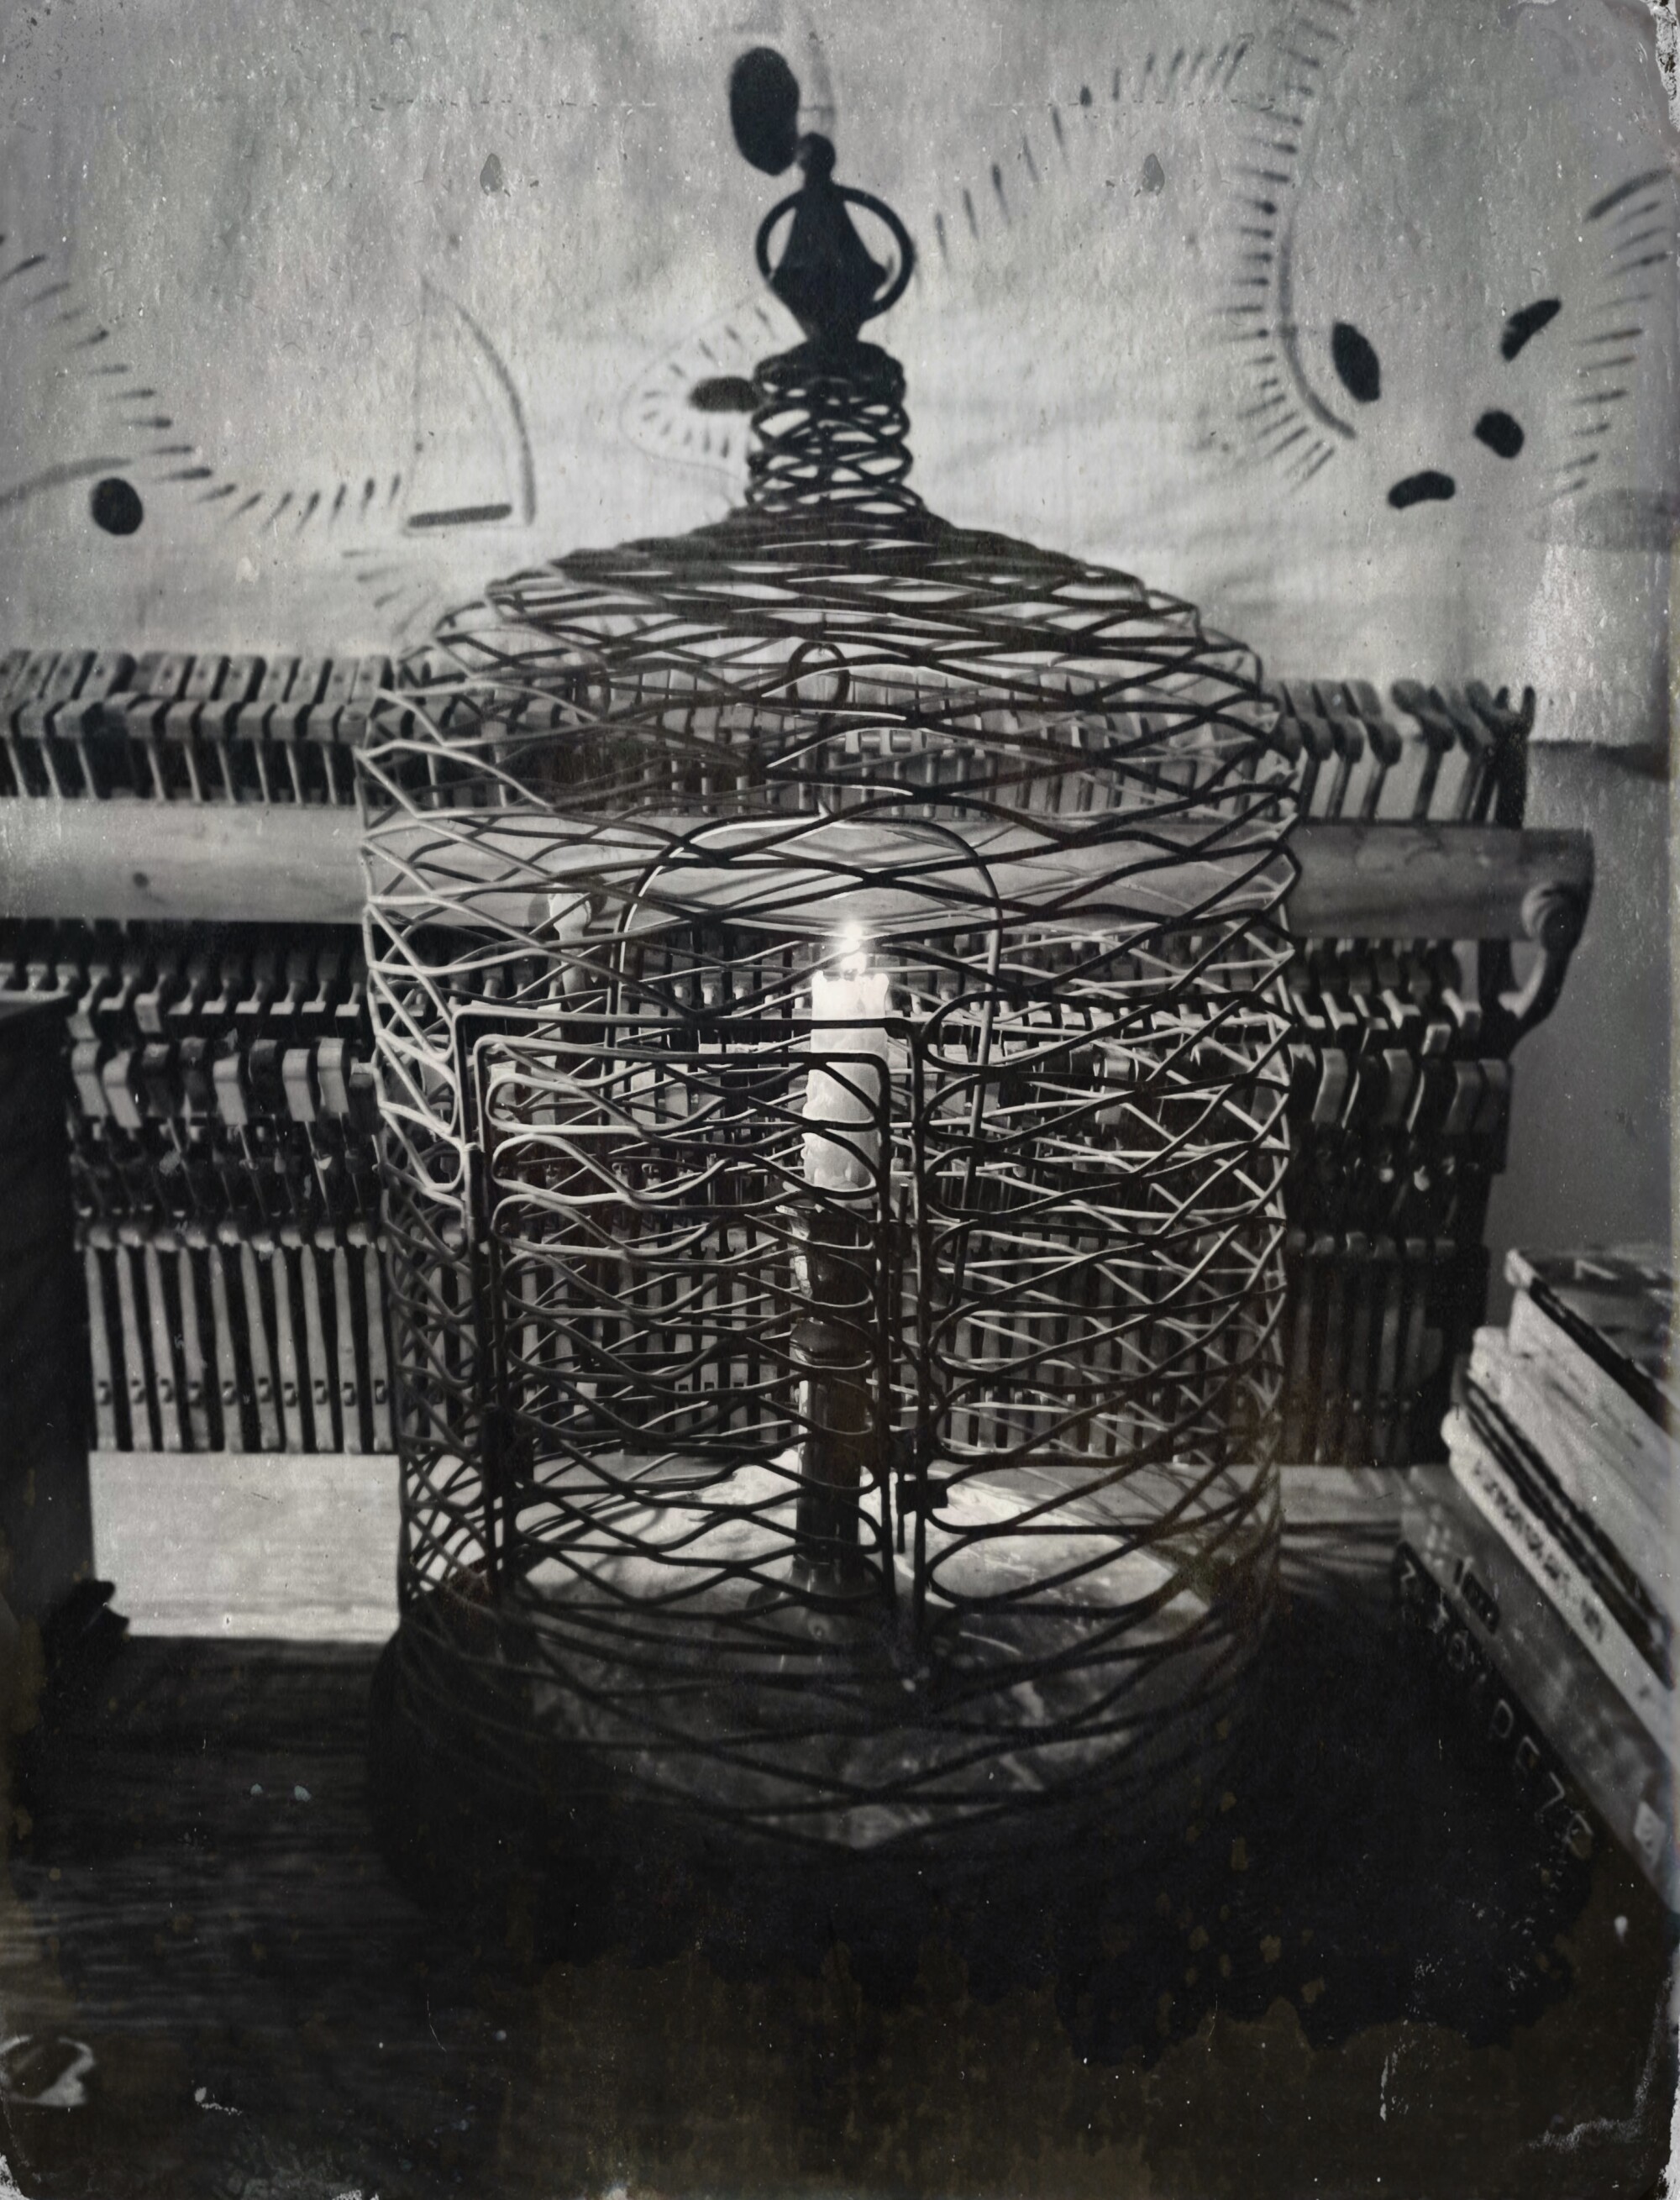 Photo of a bird cage found by Maciel Antunes — a "Gift" From Anas Nin.